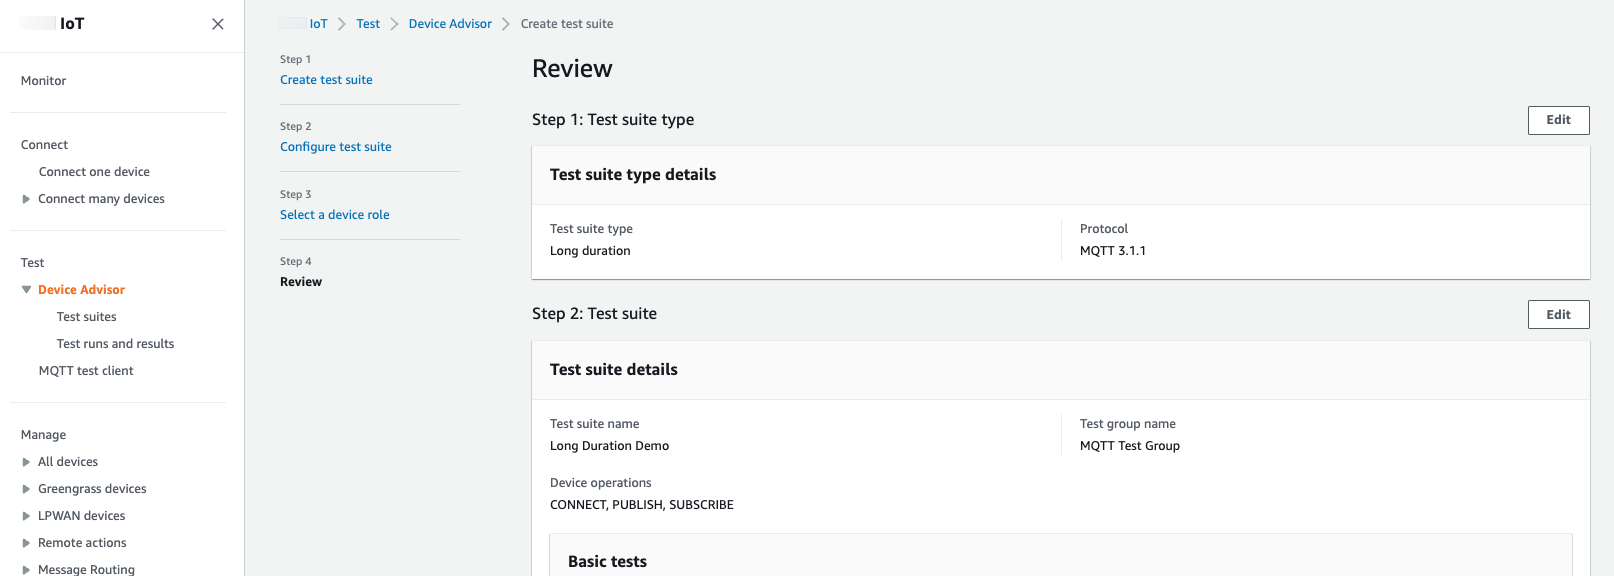 The "Review" page where you can review all the details of the Device Advisor configuration.